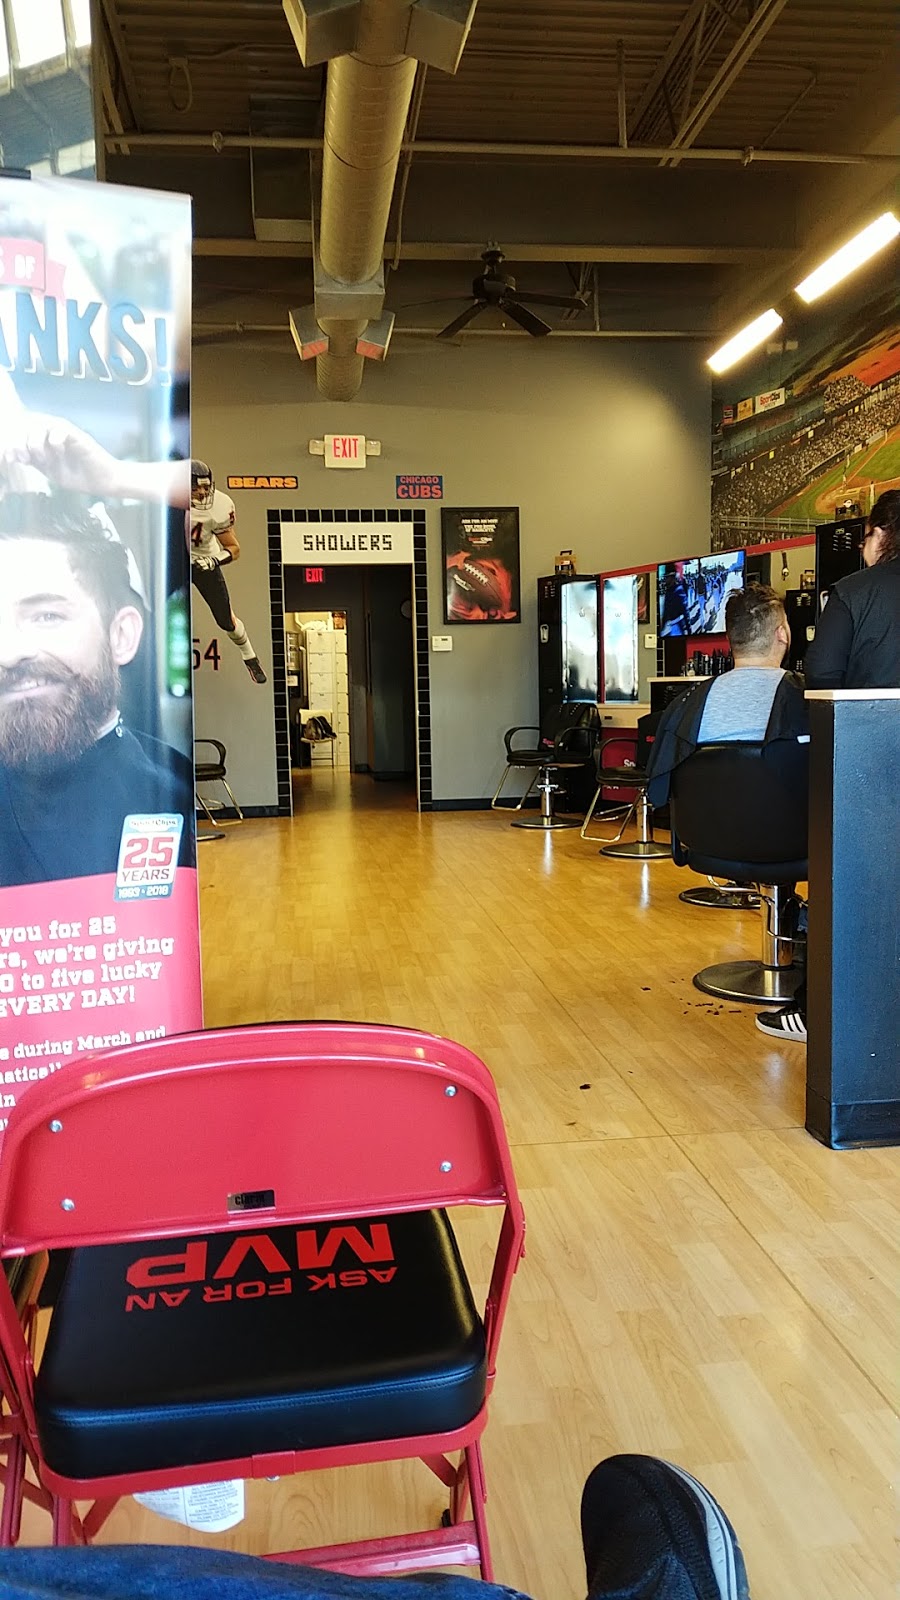 Sport Clips Haircuts of Streamwood | 1058 S Sutton Rd, Streamwood, IL 60107 | Phone: (630) 497-9090